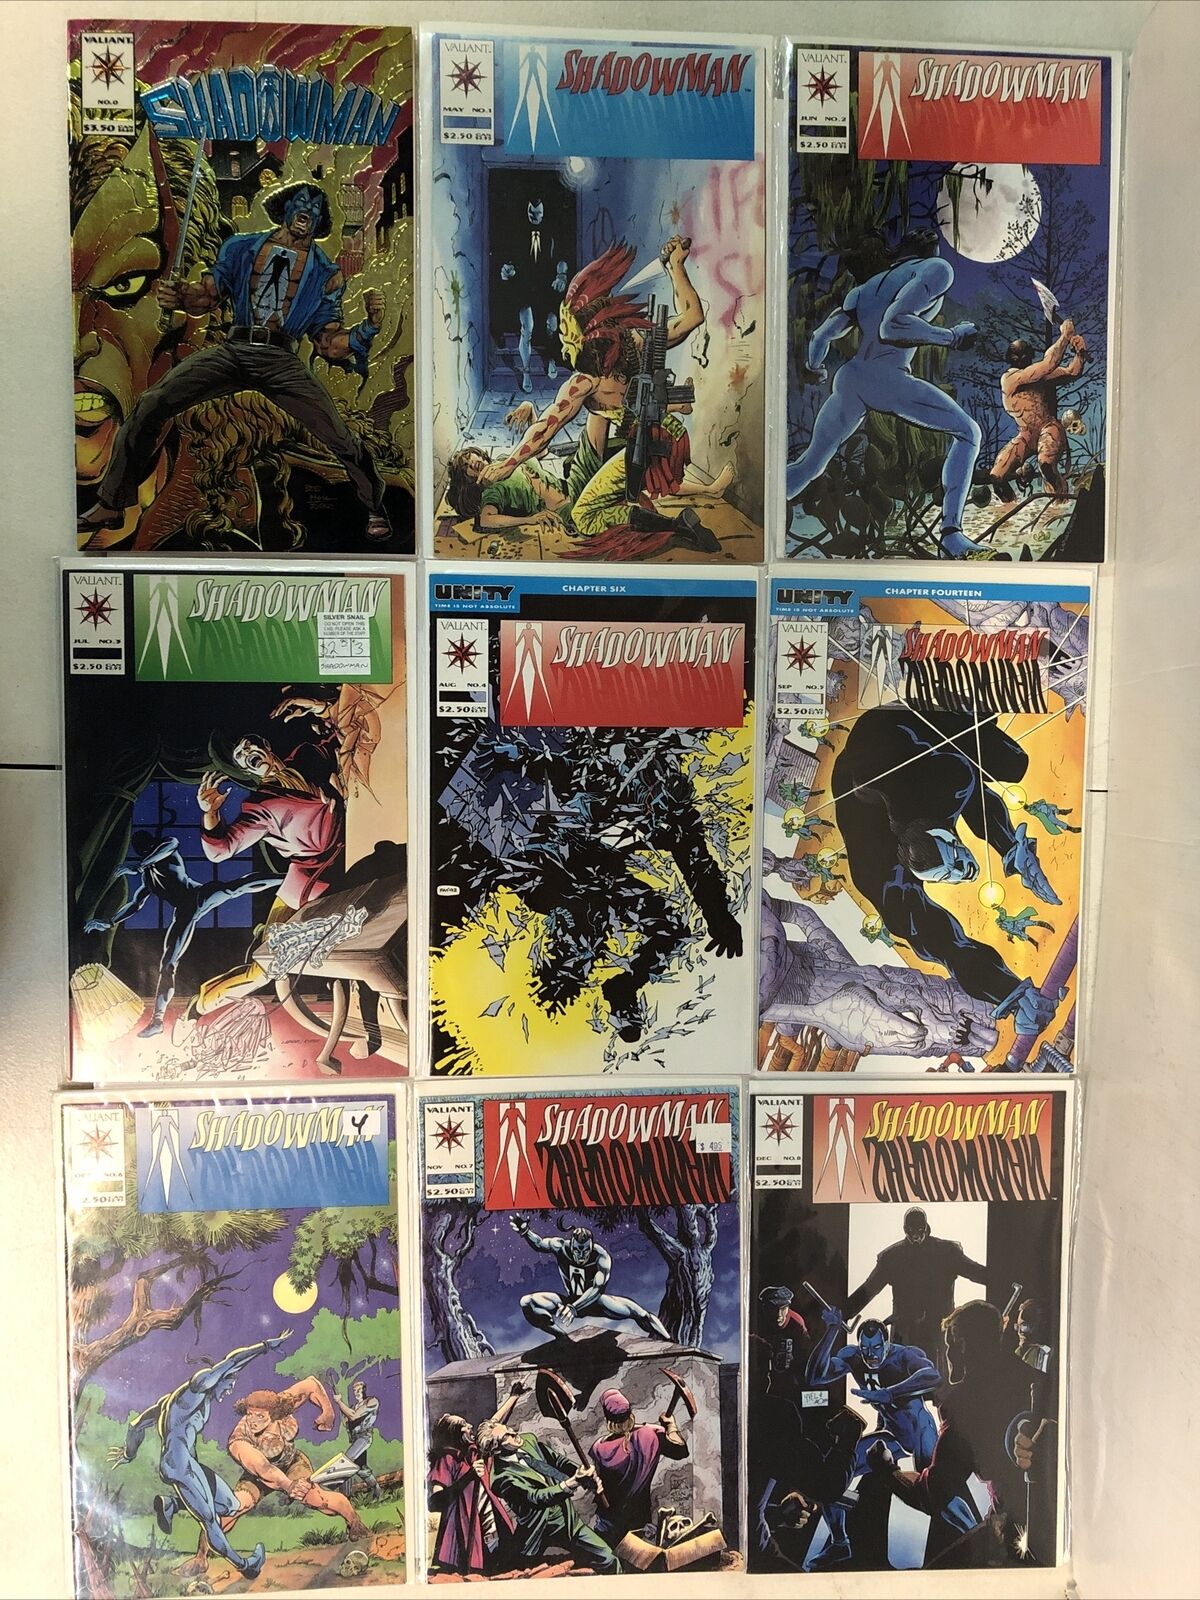 Shadowman (1994) Starter Consequential Set # 0-1-43 & Yearbook # 1 (VF/NM)